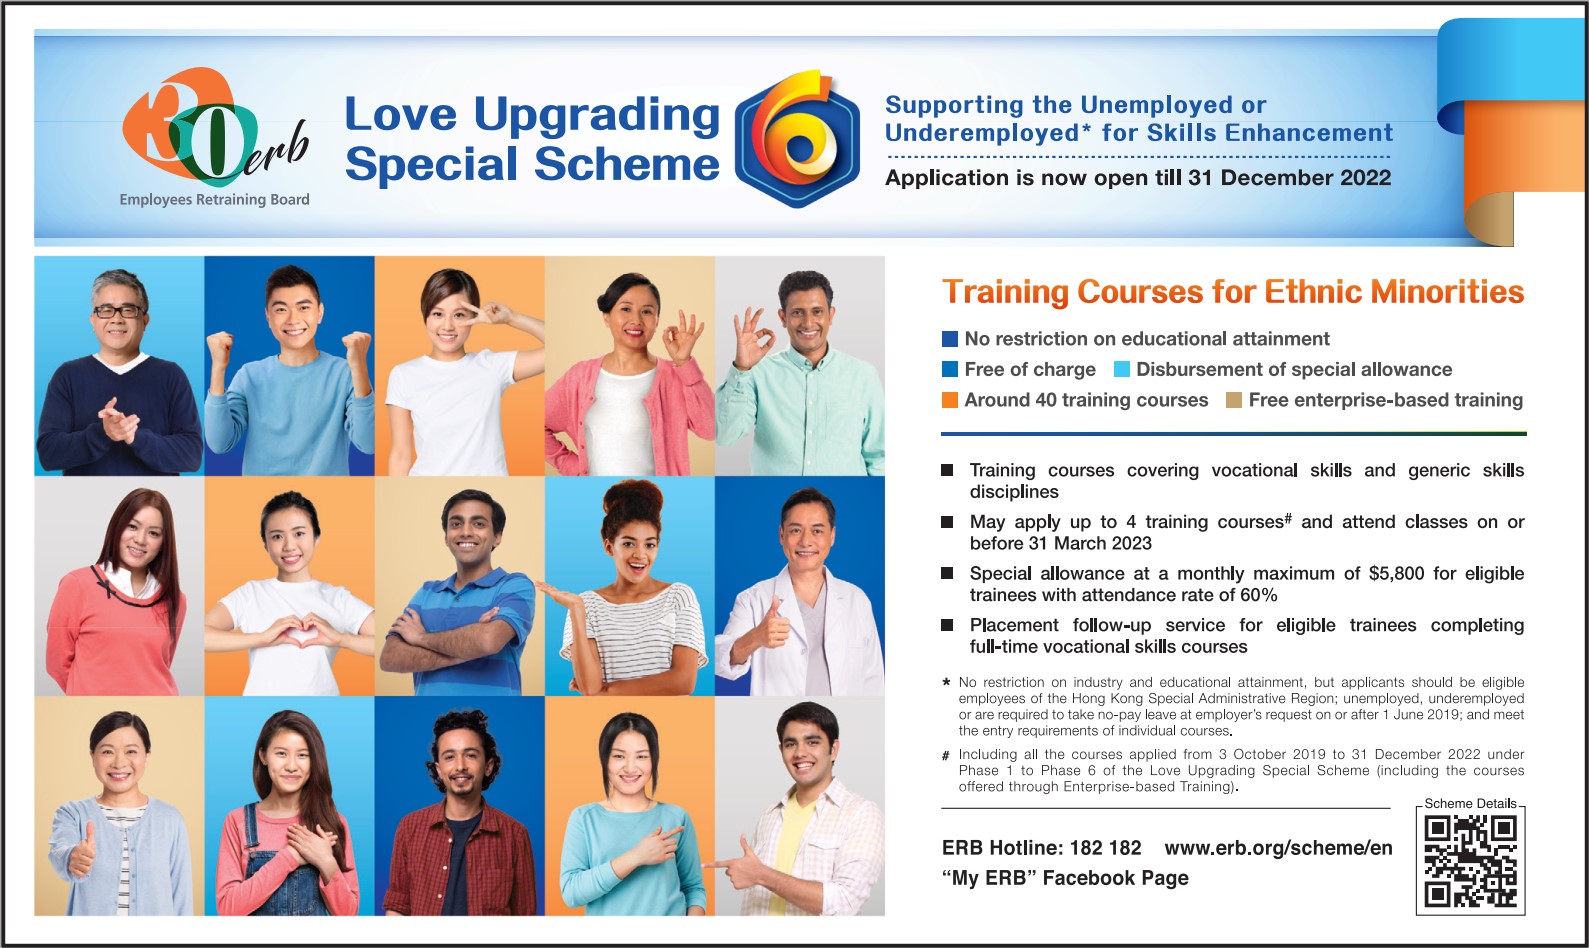 Click here to download the image version of newspaper advertisement of Love Upgrading Special Scheme 6 (July 2022)